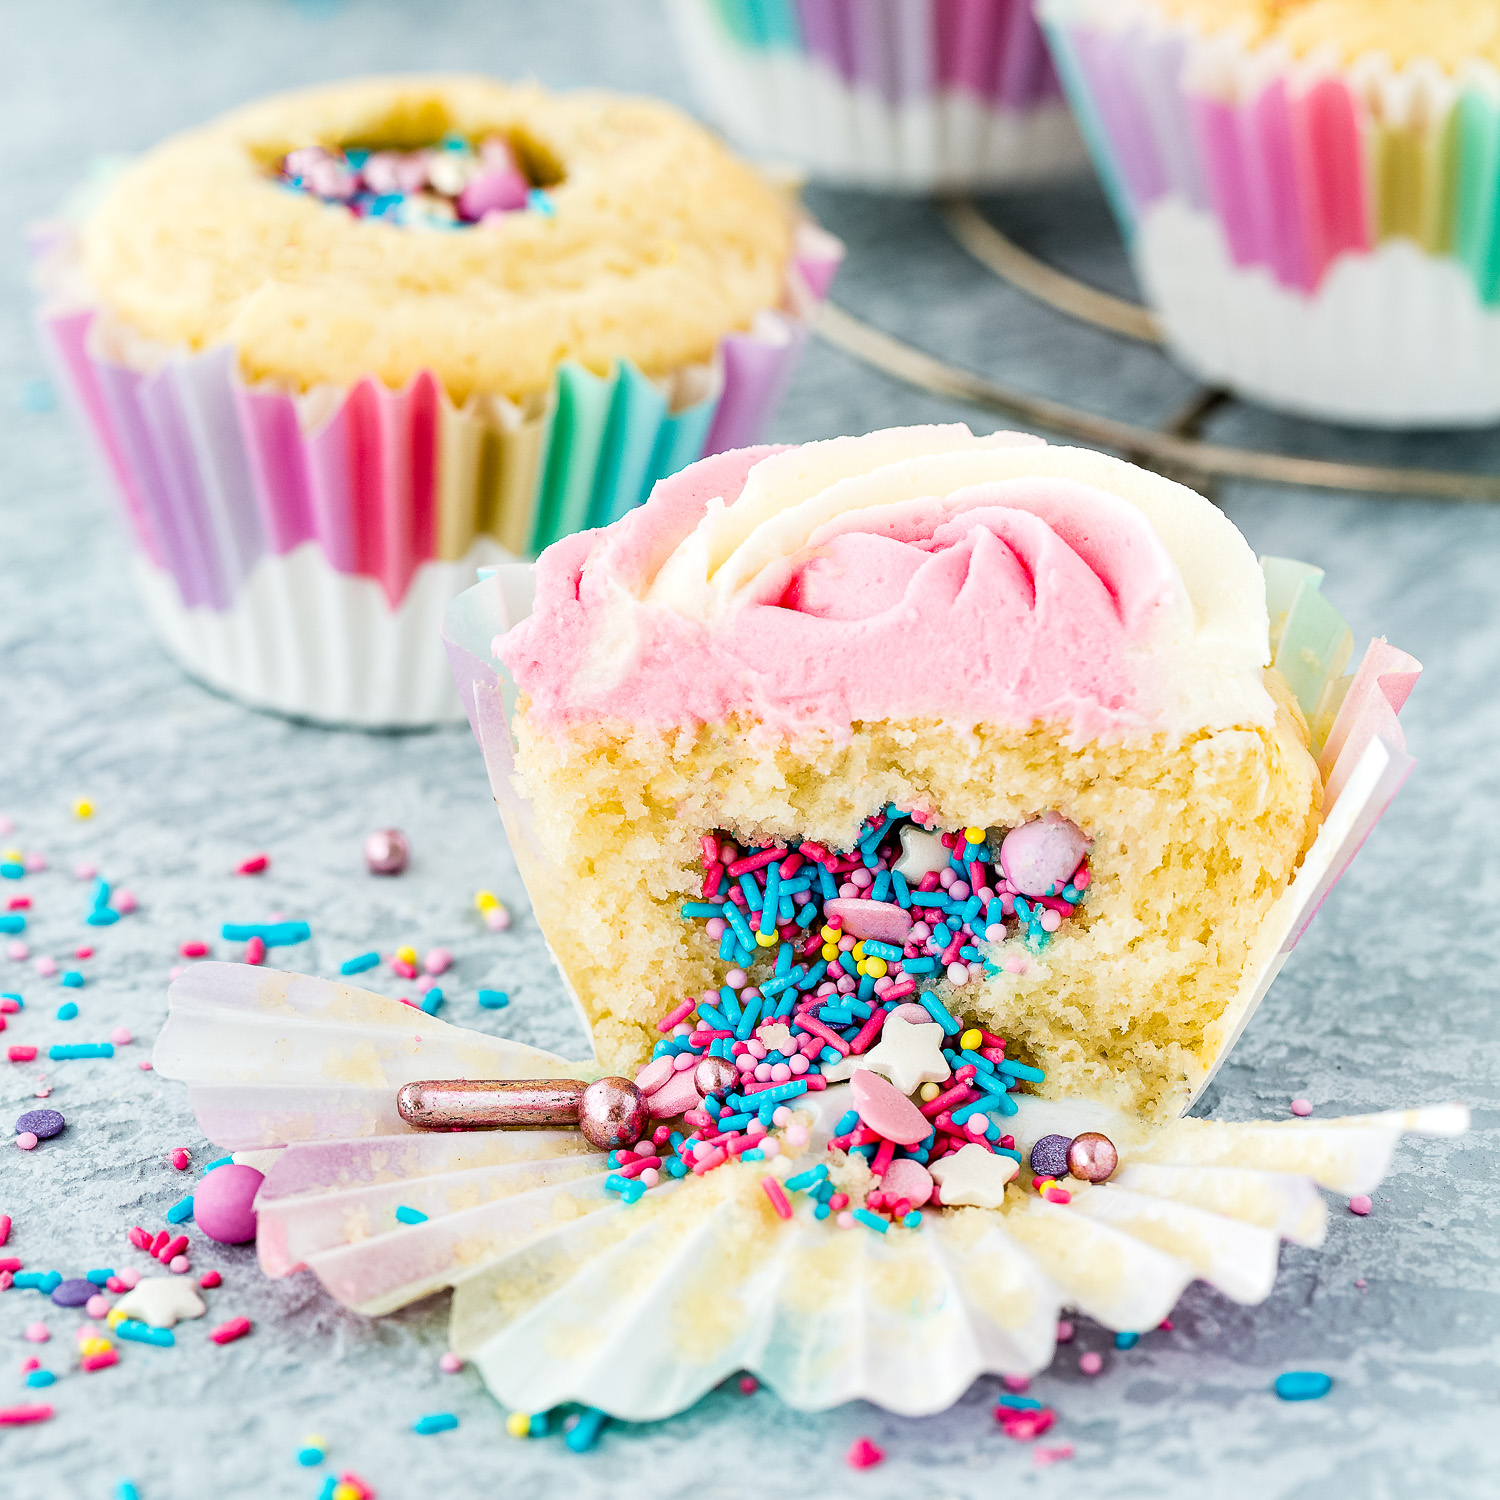 Eggless Sprinkle Surprise Cupcakes over a blue surface.